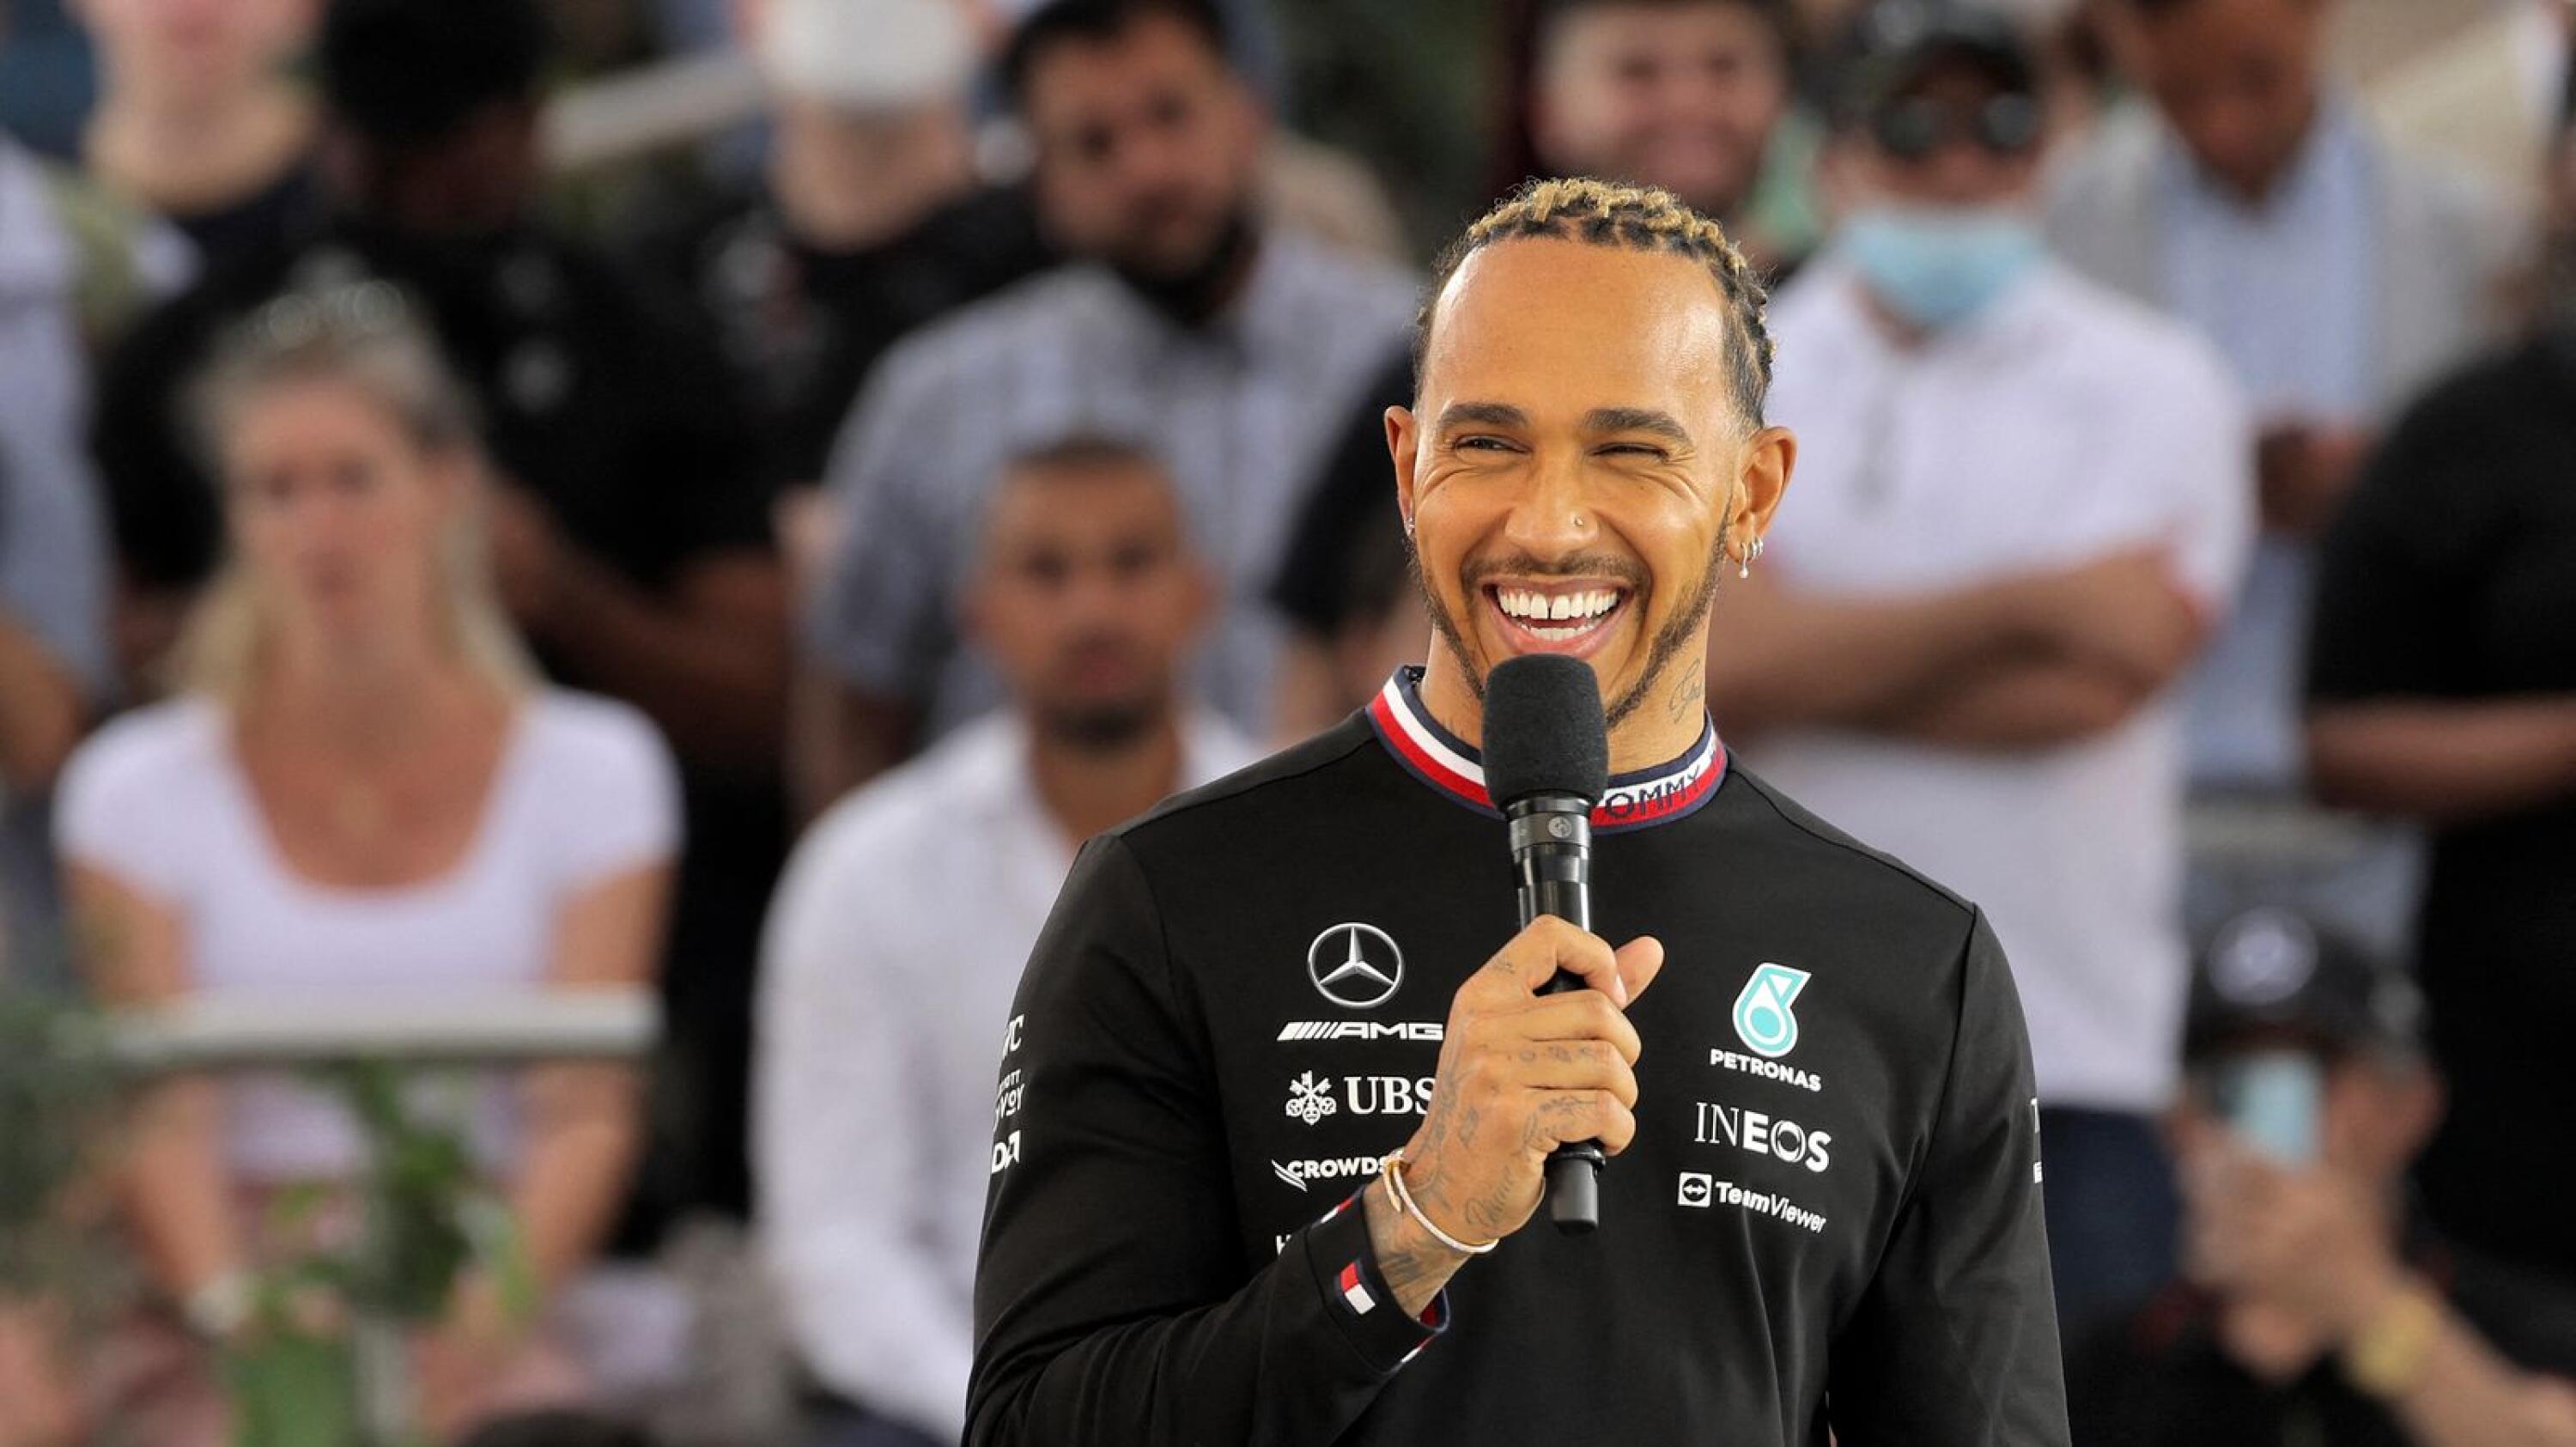 Mercedes' British F1 Driver Lewis Hamilton speaks at Expo Dubai 2020 in the Gulf emirate on Monday